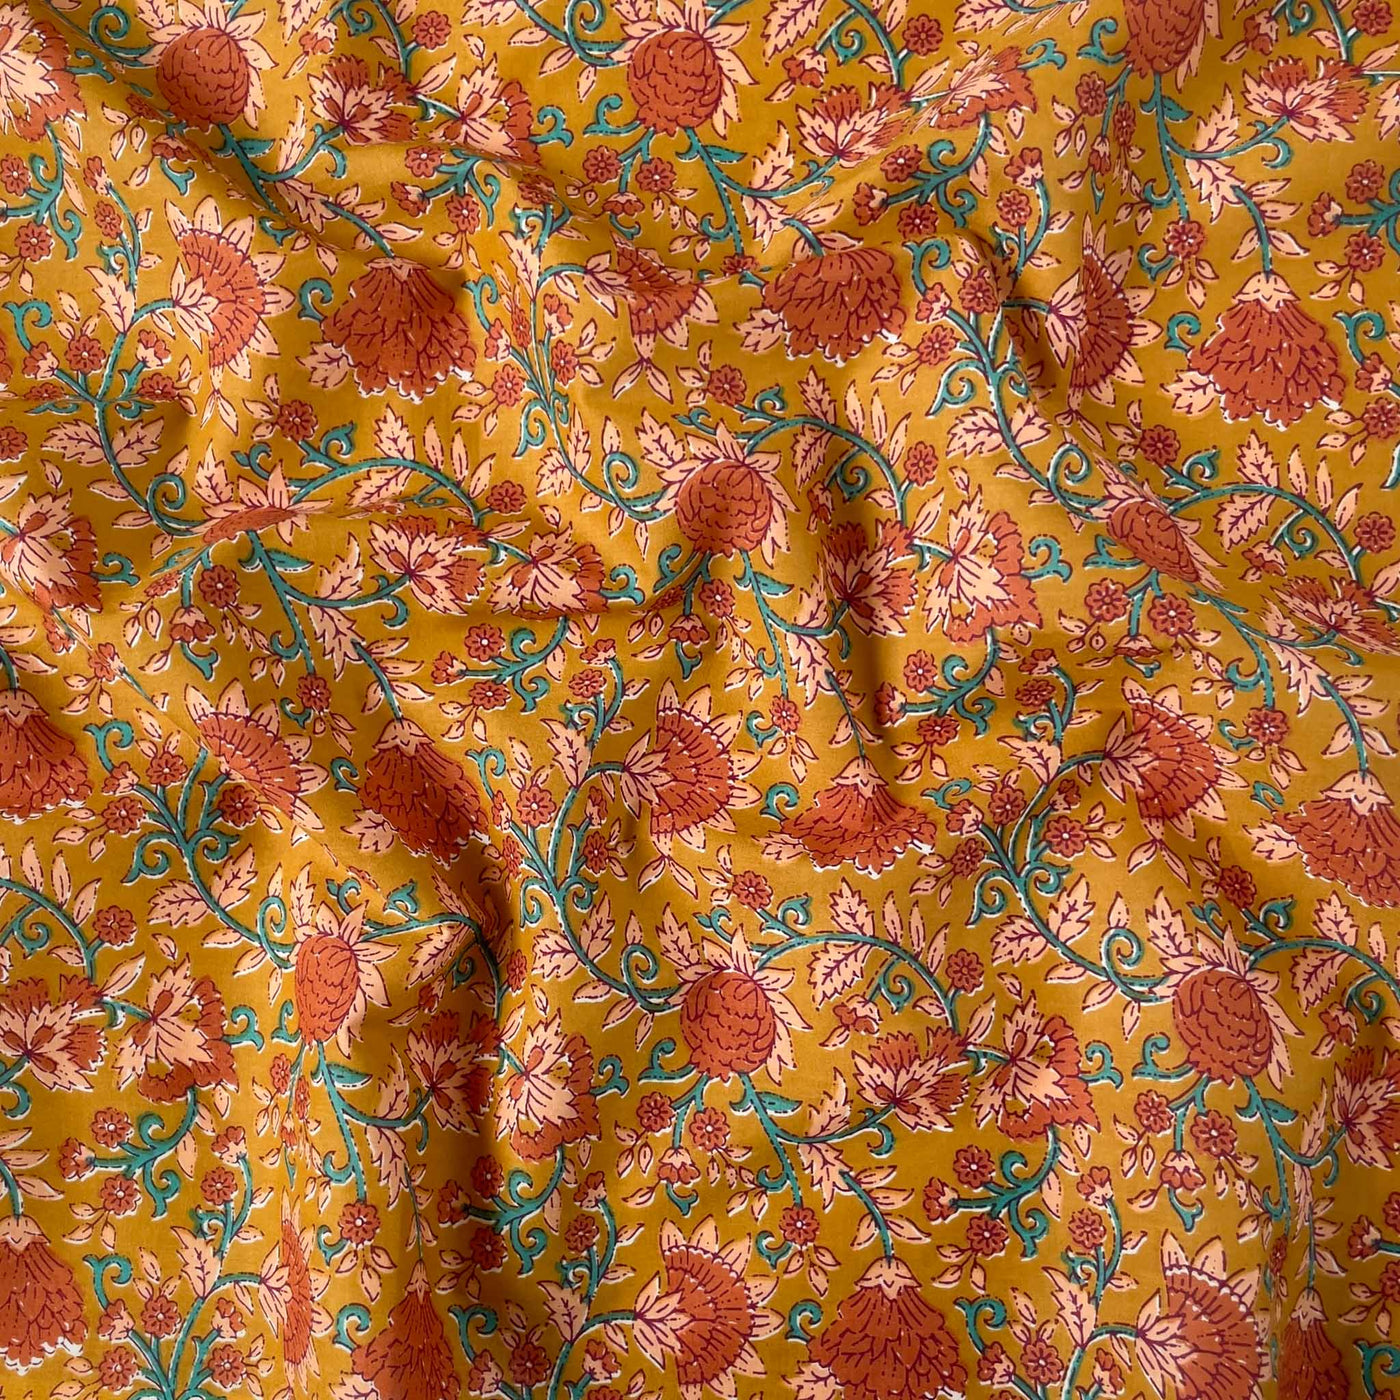 Egyptian Giza Cotton Shirting Cut Piece (CUT PIECE) Mustard & Peach Egyptian Floral Vines Screen Printed Pure Cotton Fabric (Width 43 inches)